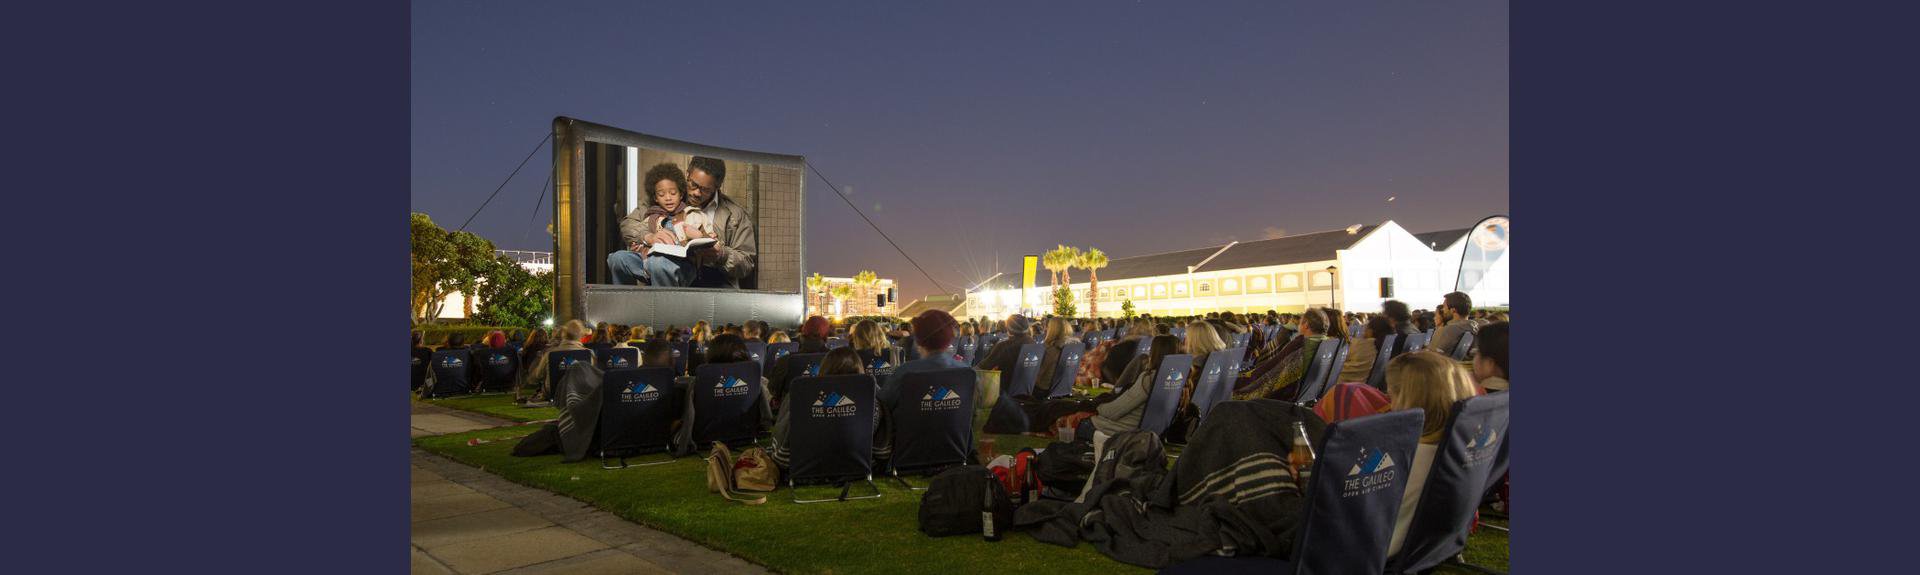 Outdoor movies: The Pursuit Of Happyness